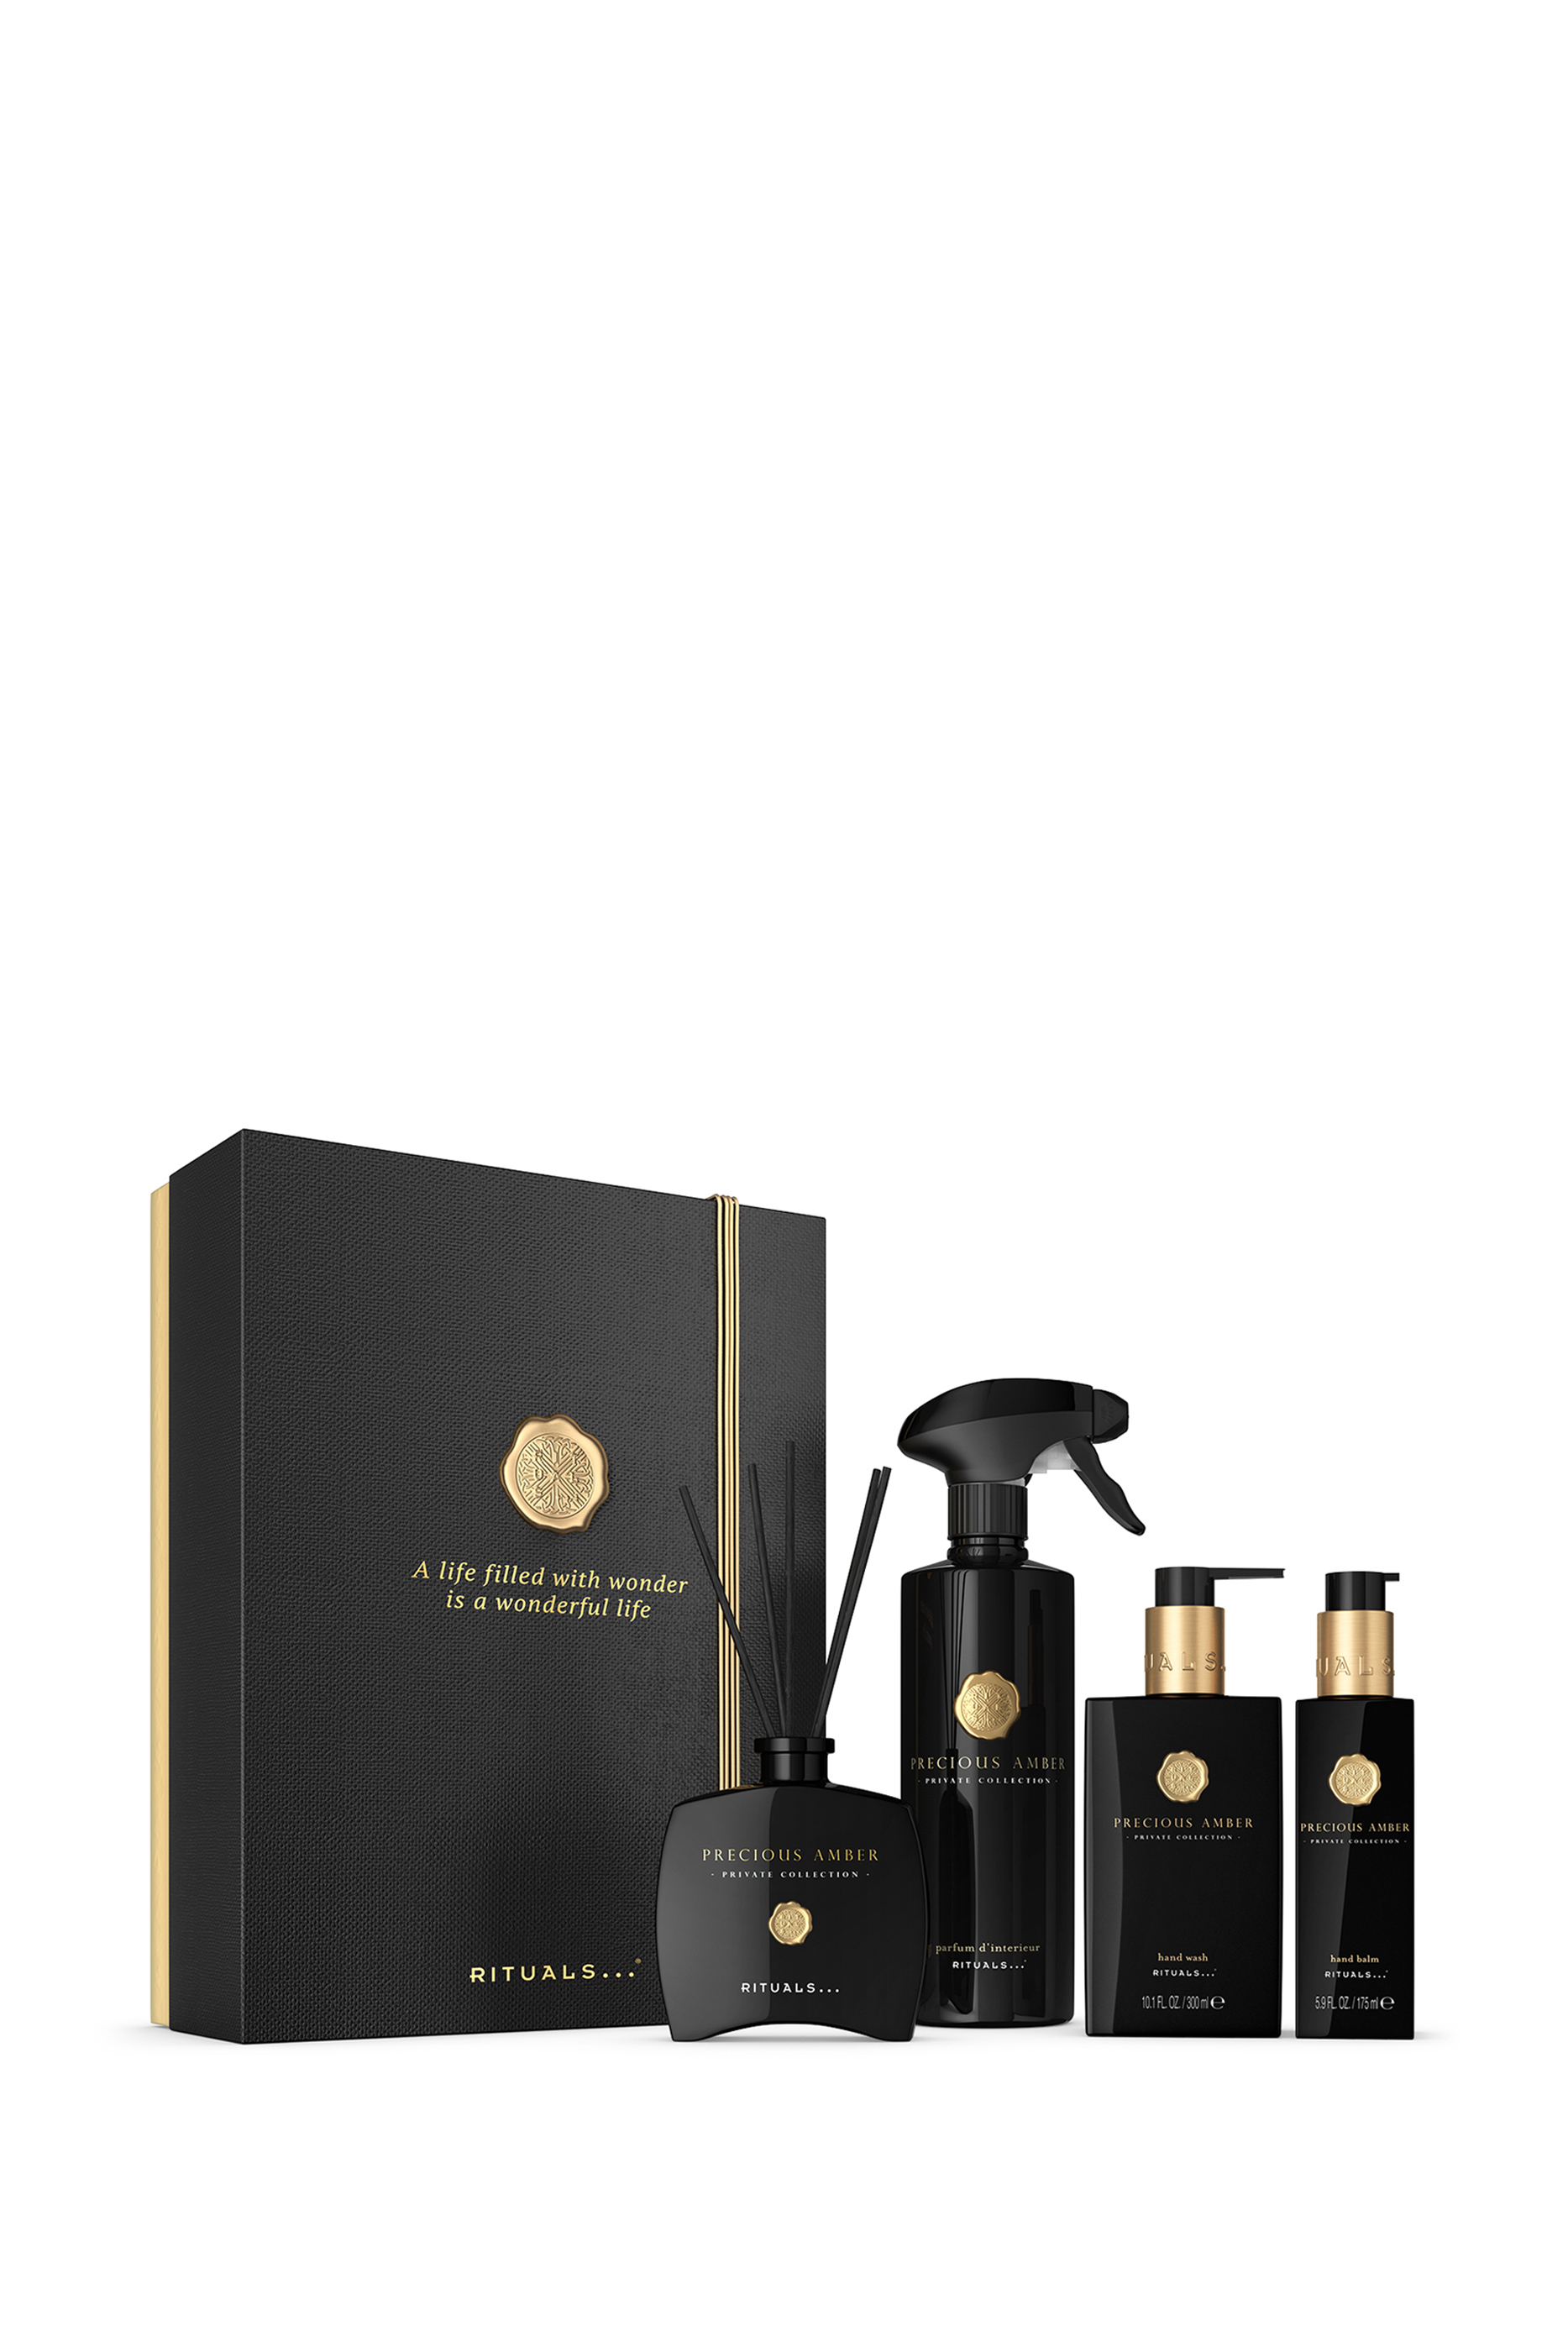 Buy Rituals Precious Amber Gift Set for